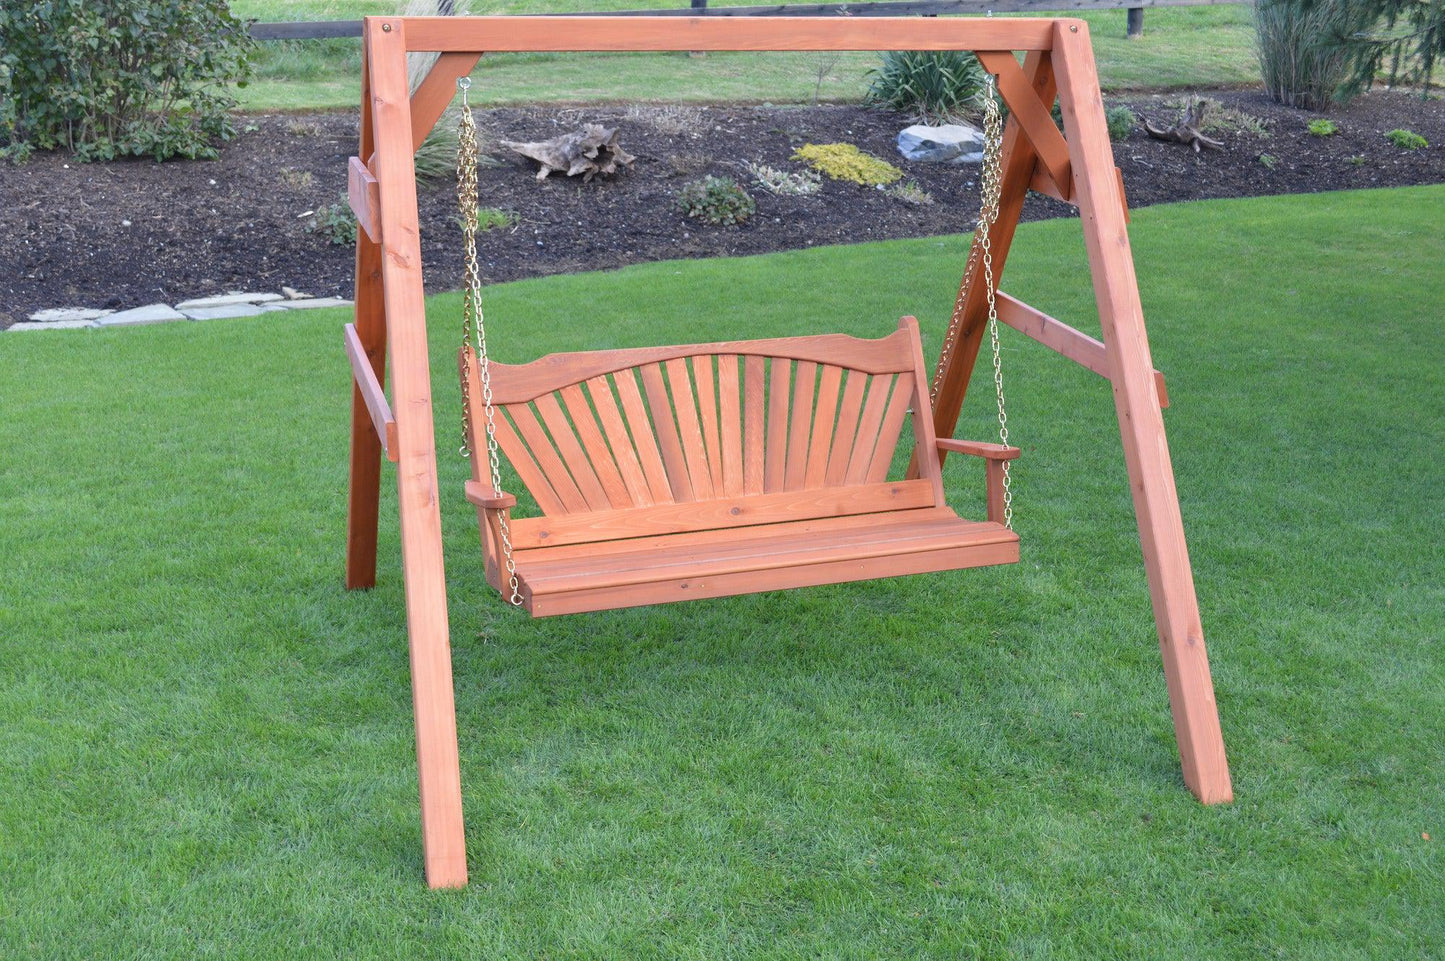 Regallion Outdoor 6ft. Heavy Duty 4x4  A-Frame  Red Cedar Swing Stand for Swing or Swingbed Heavy Duty 1000 lbs Max Weight Capacity (Hangers Included) - LEAD TIME TO SHIP 2 WEEKS